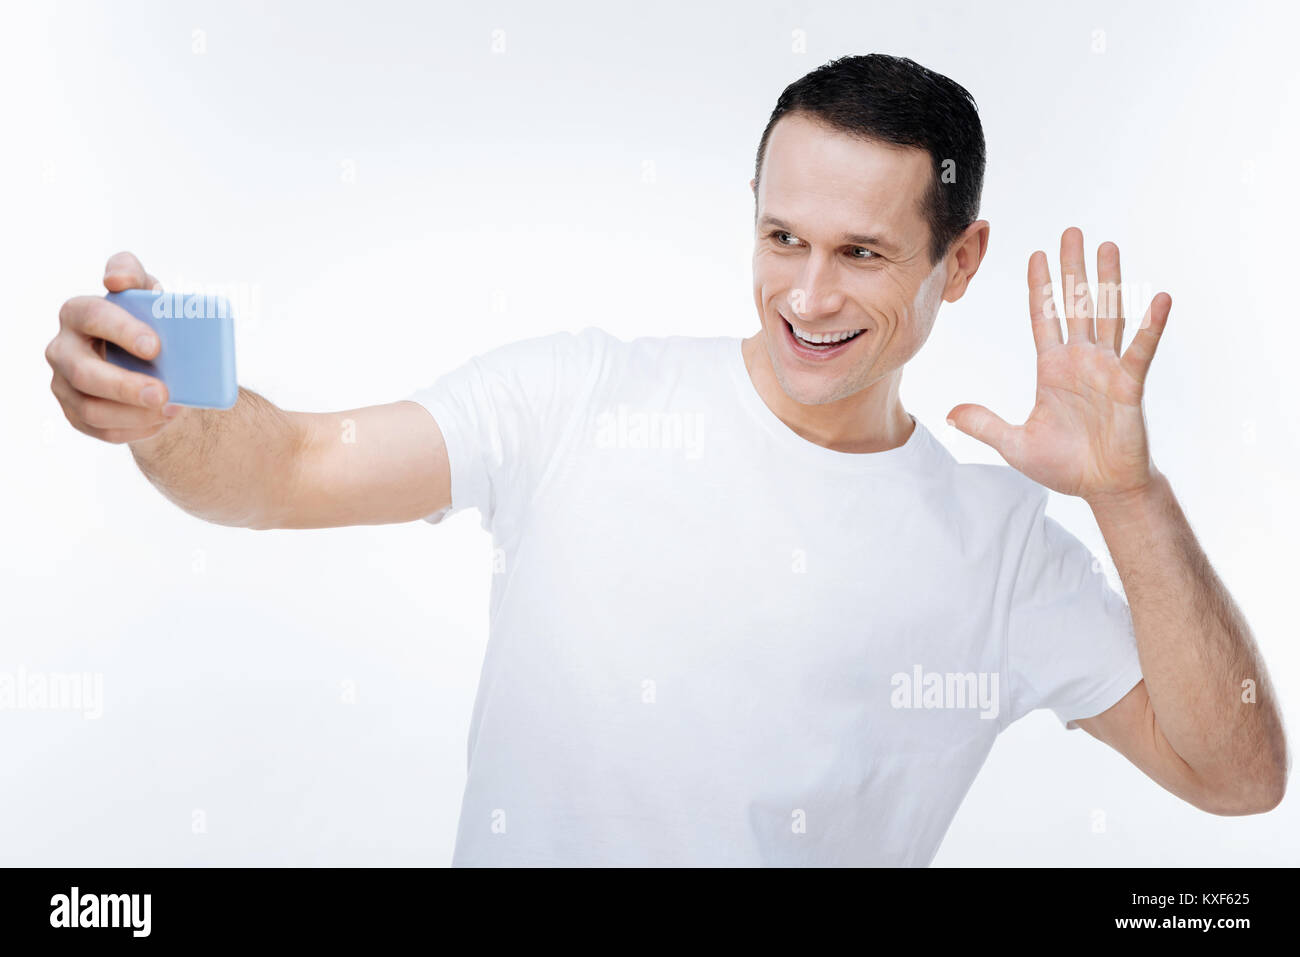 Happy cheerful man showing his hand Stock Photo